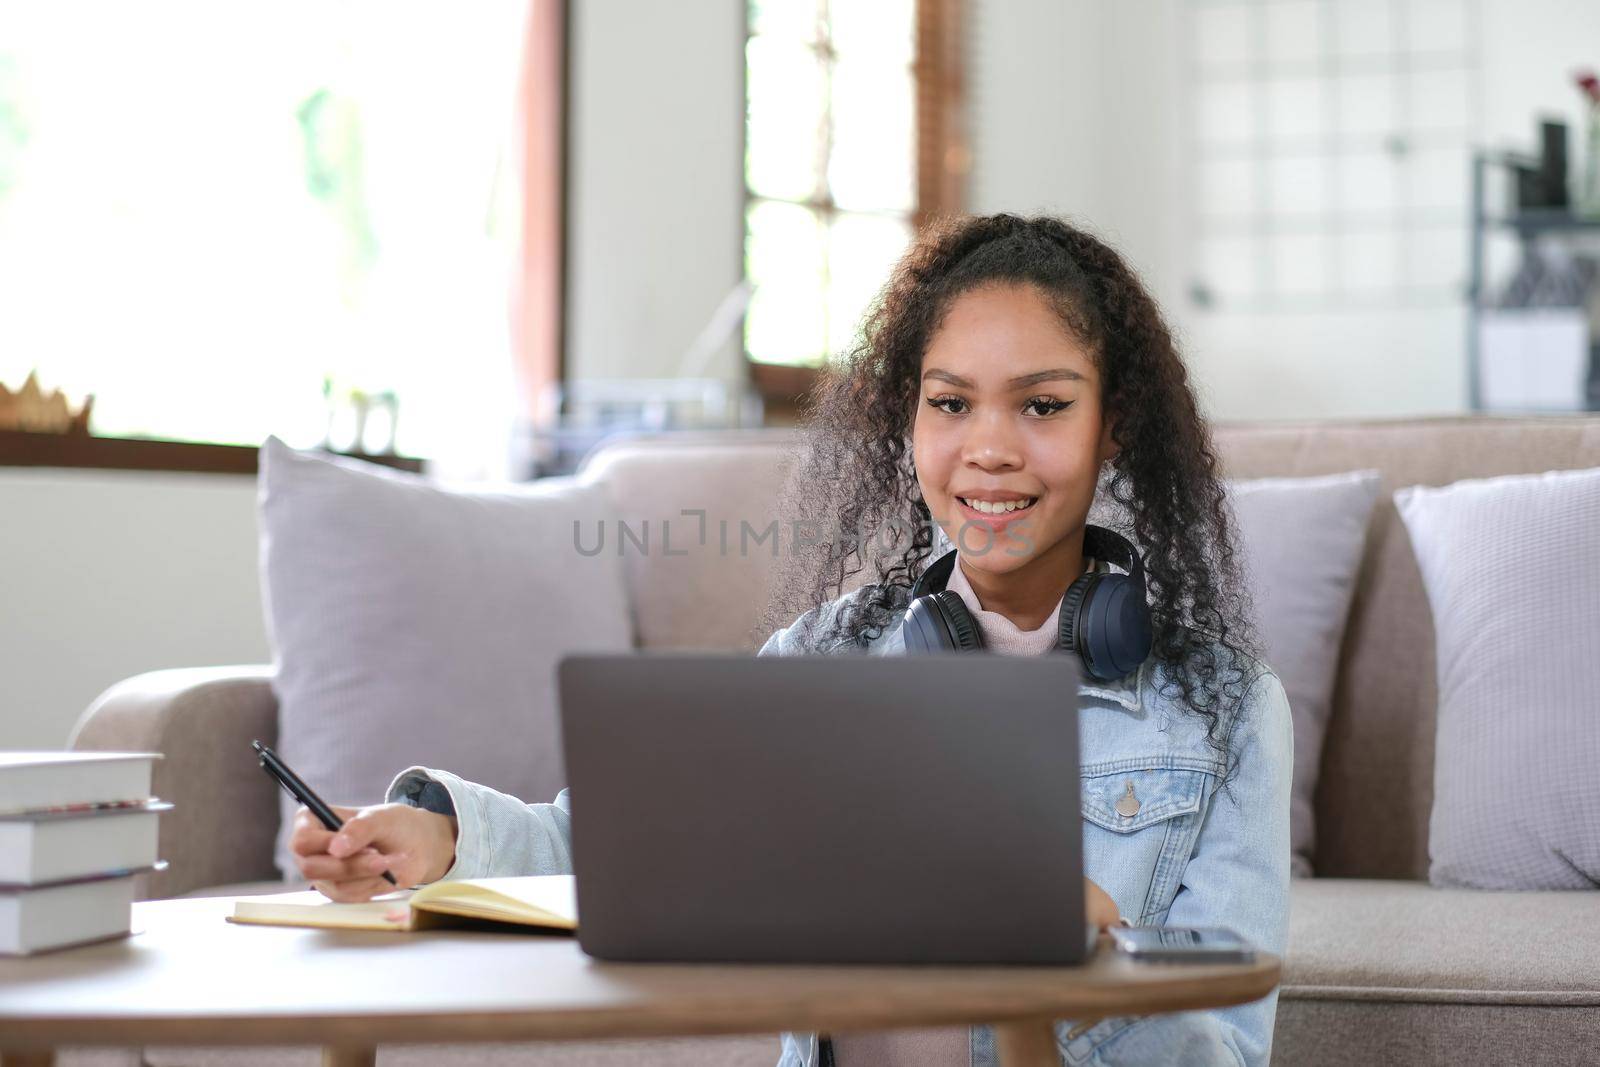 Portrait of happy female student with dark skin smiling at camera. cheerful African American hipster girl enjoying e learning and preparation to course work.